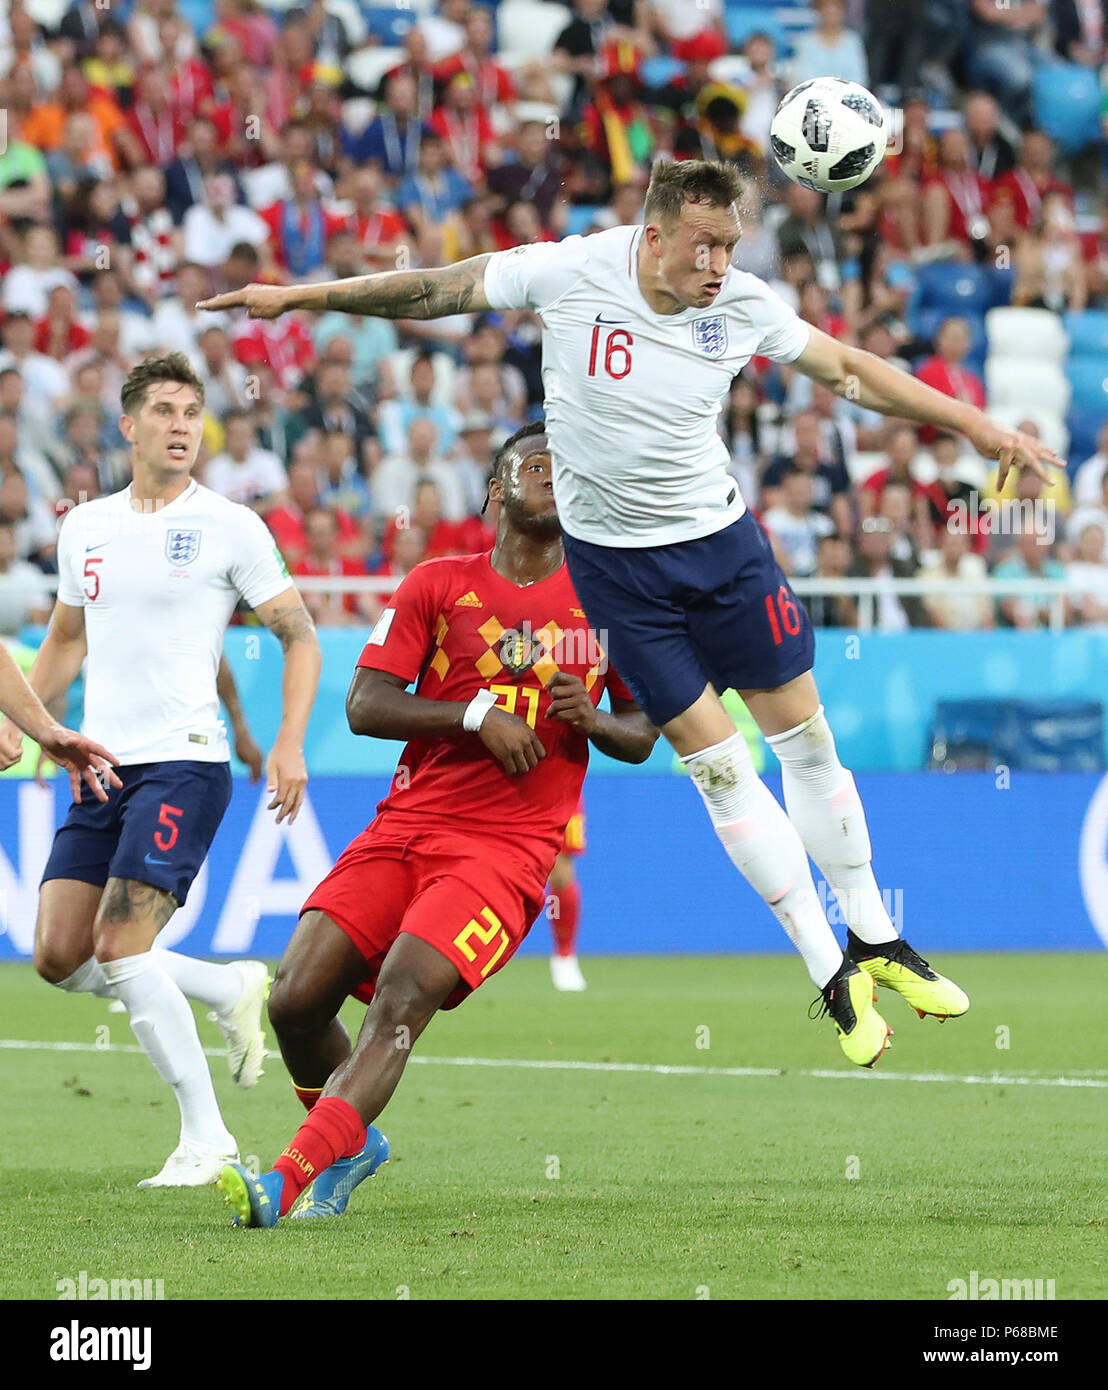 Kaliningrad, Russia. 28th June, 2018. Phil Jones (top) of England competes for a header during the 2018 FIFA World Cup Group G match between England and Belgium in Kaliningrad, Russia, June 28, 2018. Credit: Cao Can/Xinhua/Alamy Live News Stock Photo